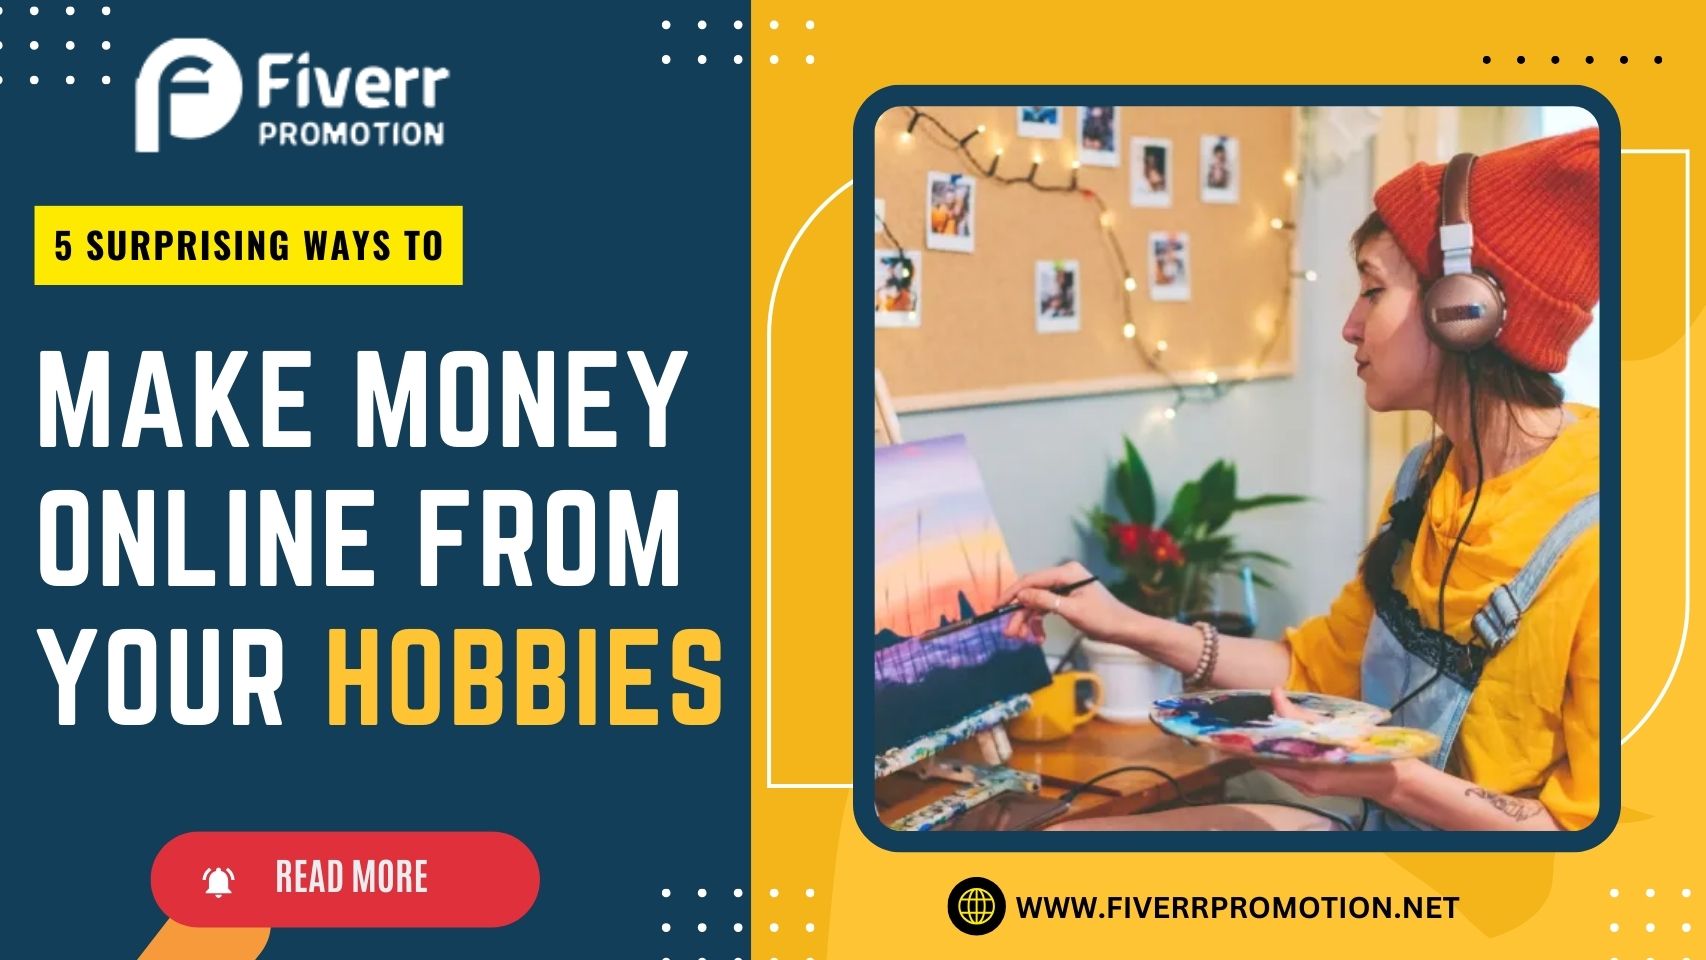 5 Surprising Ways to Make Money Online From Your Hobbies